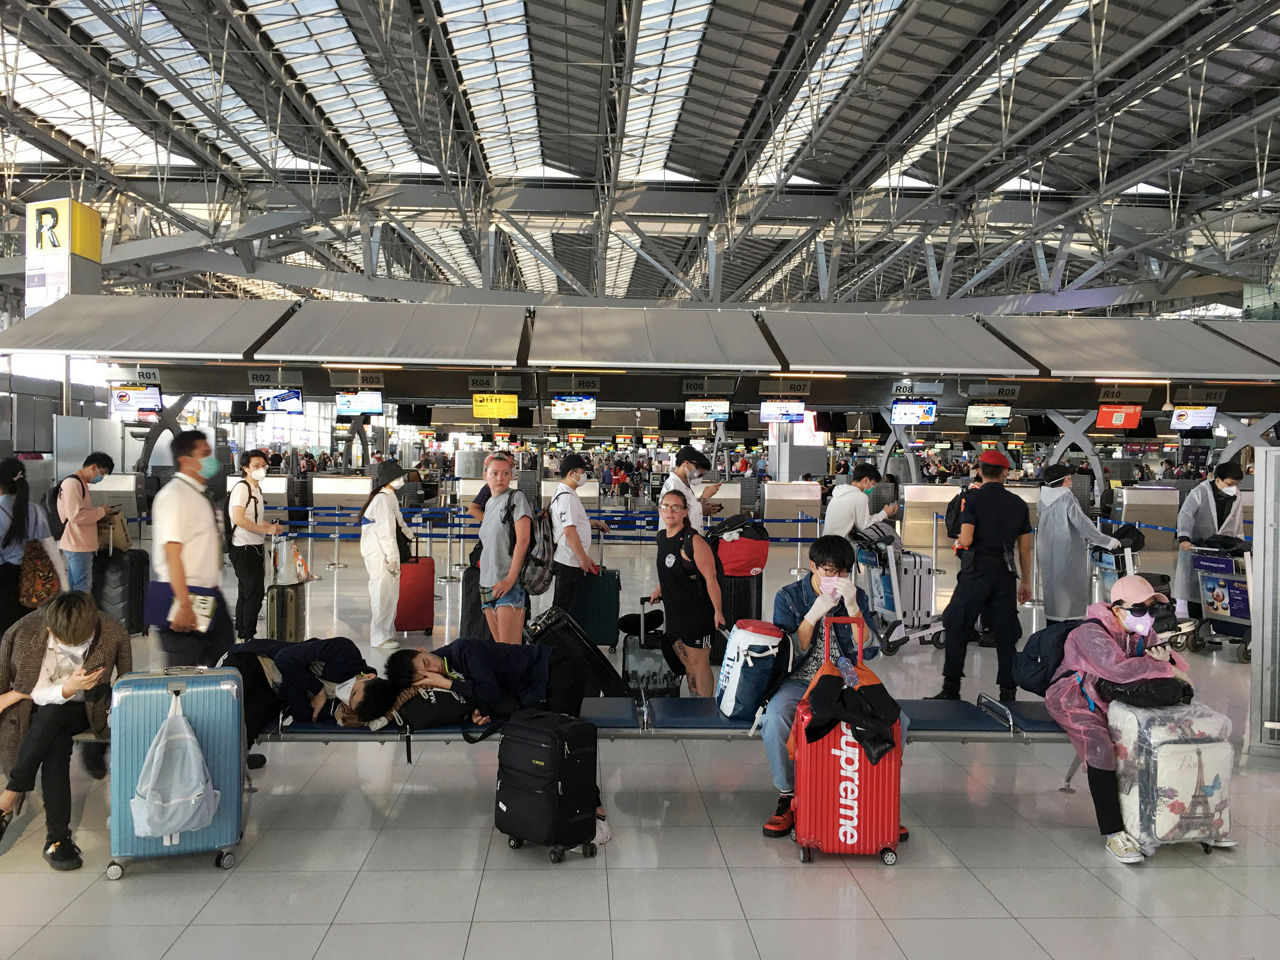 Bangkok, Thailand - March 24, 2020: Travelers Getting Ready To Depart From The Airport With Their Suitcases And Wearing Protective Clothing During The Coronavirus Epidemic